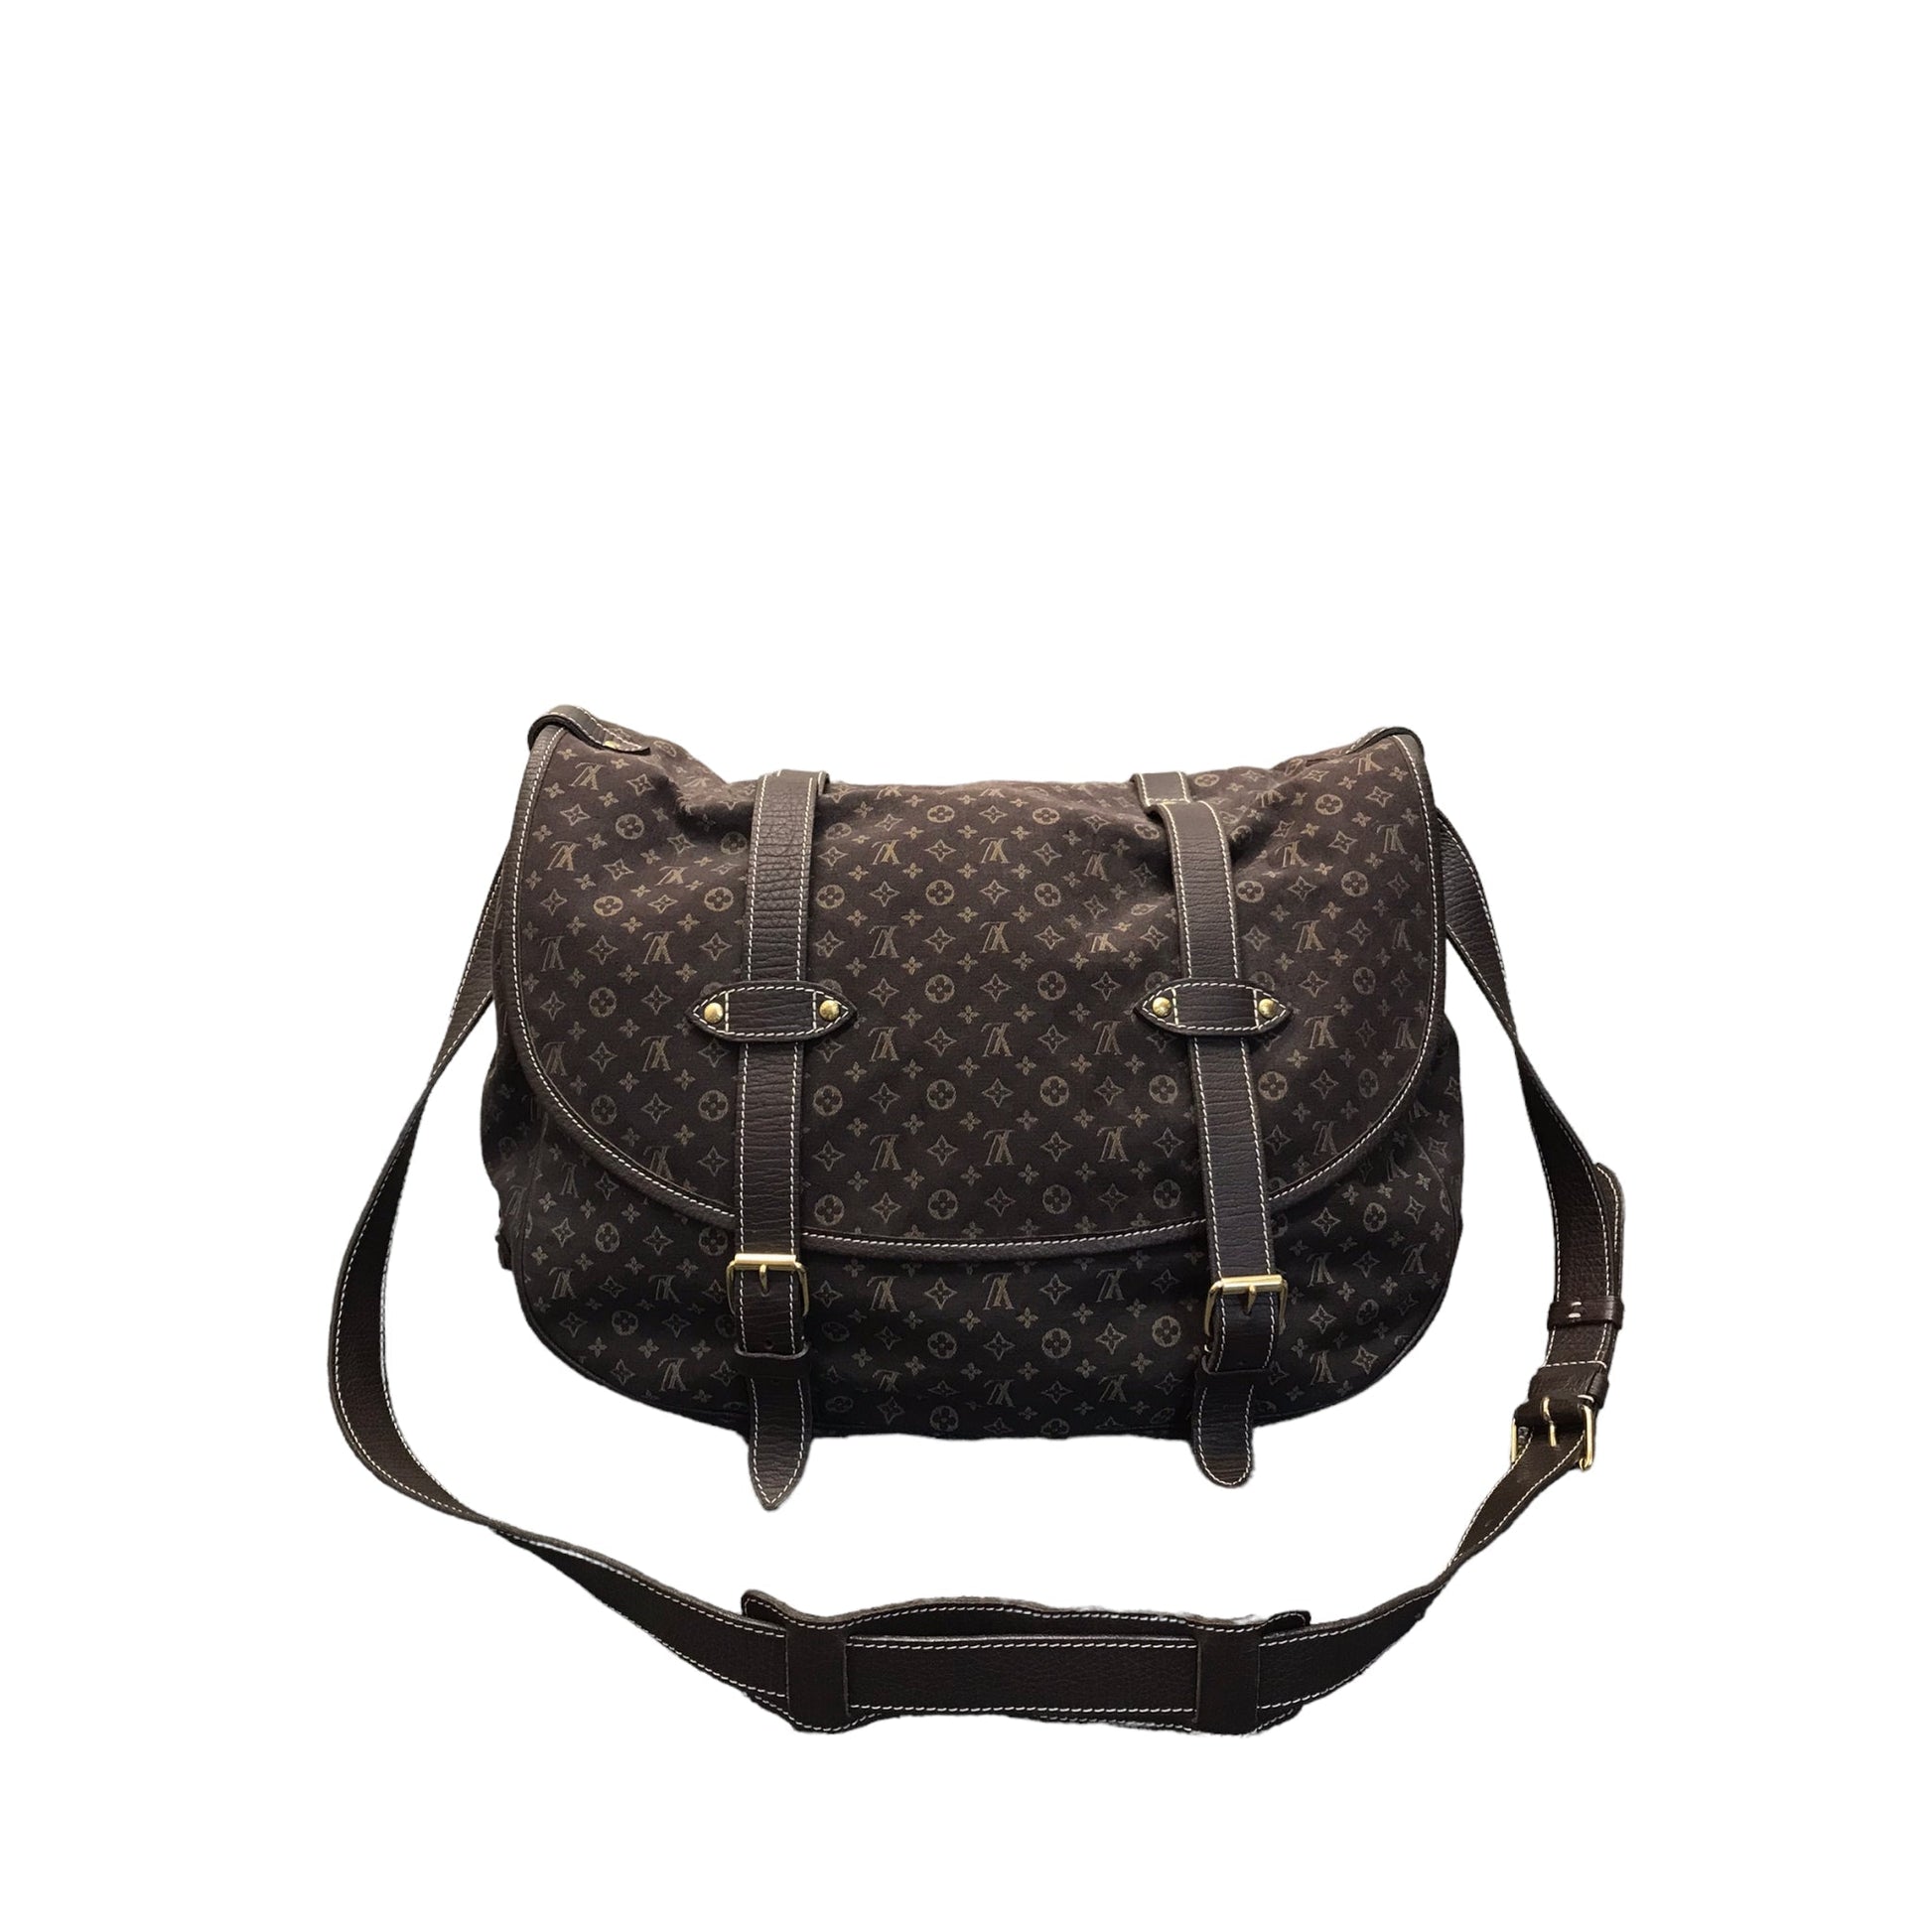 Luxury products - LV postman bag is made by Monogram and